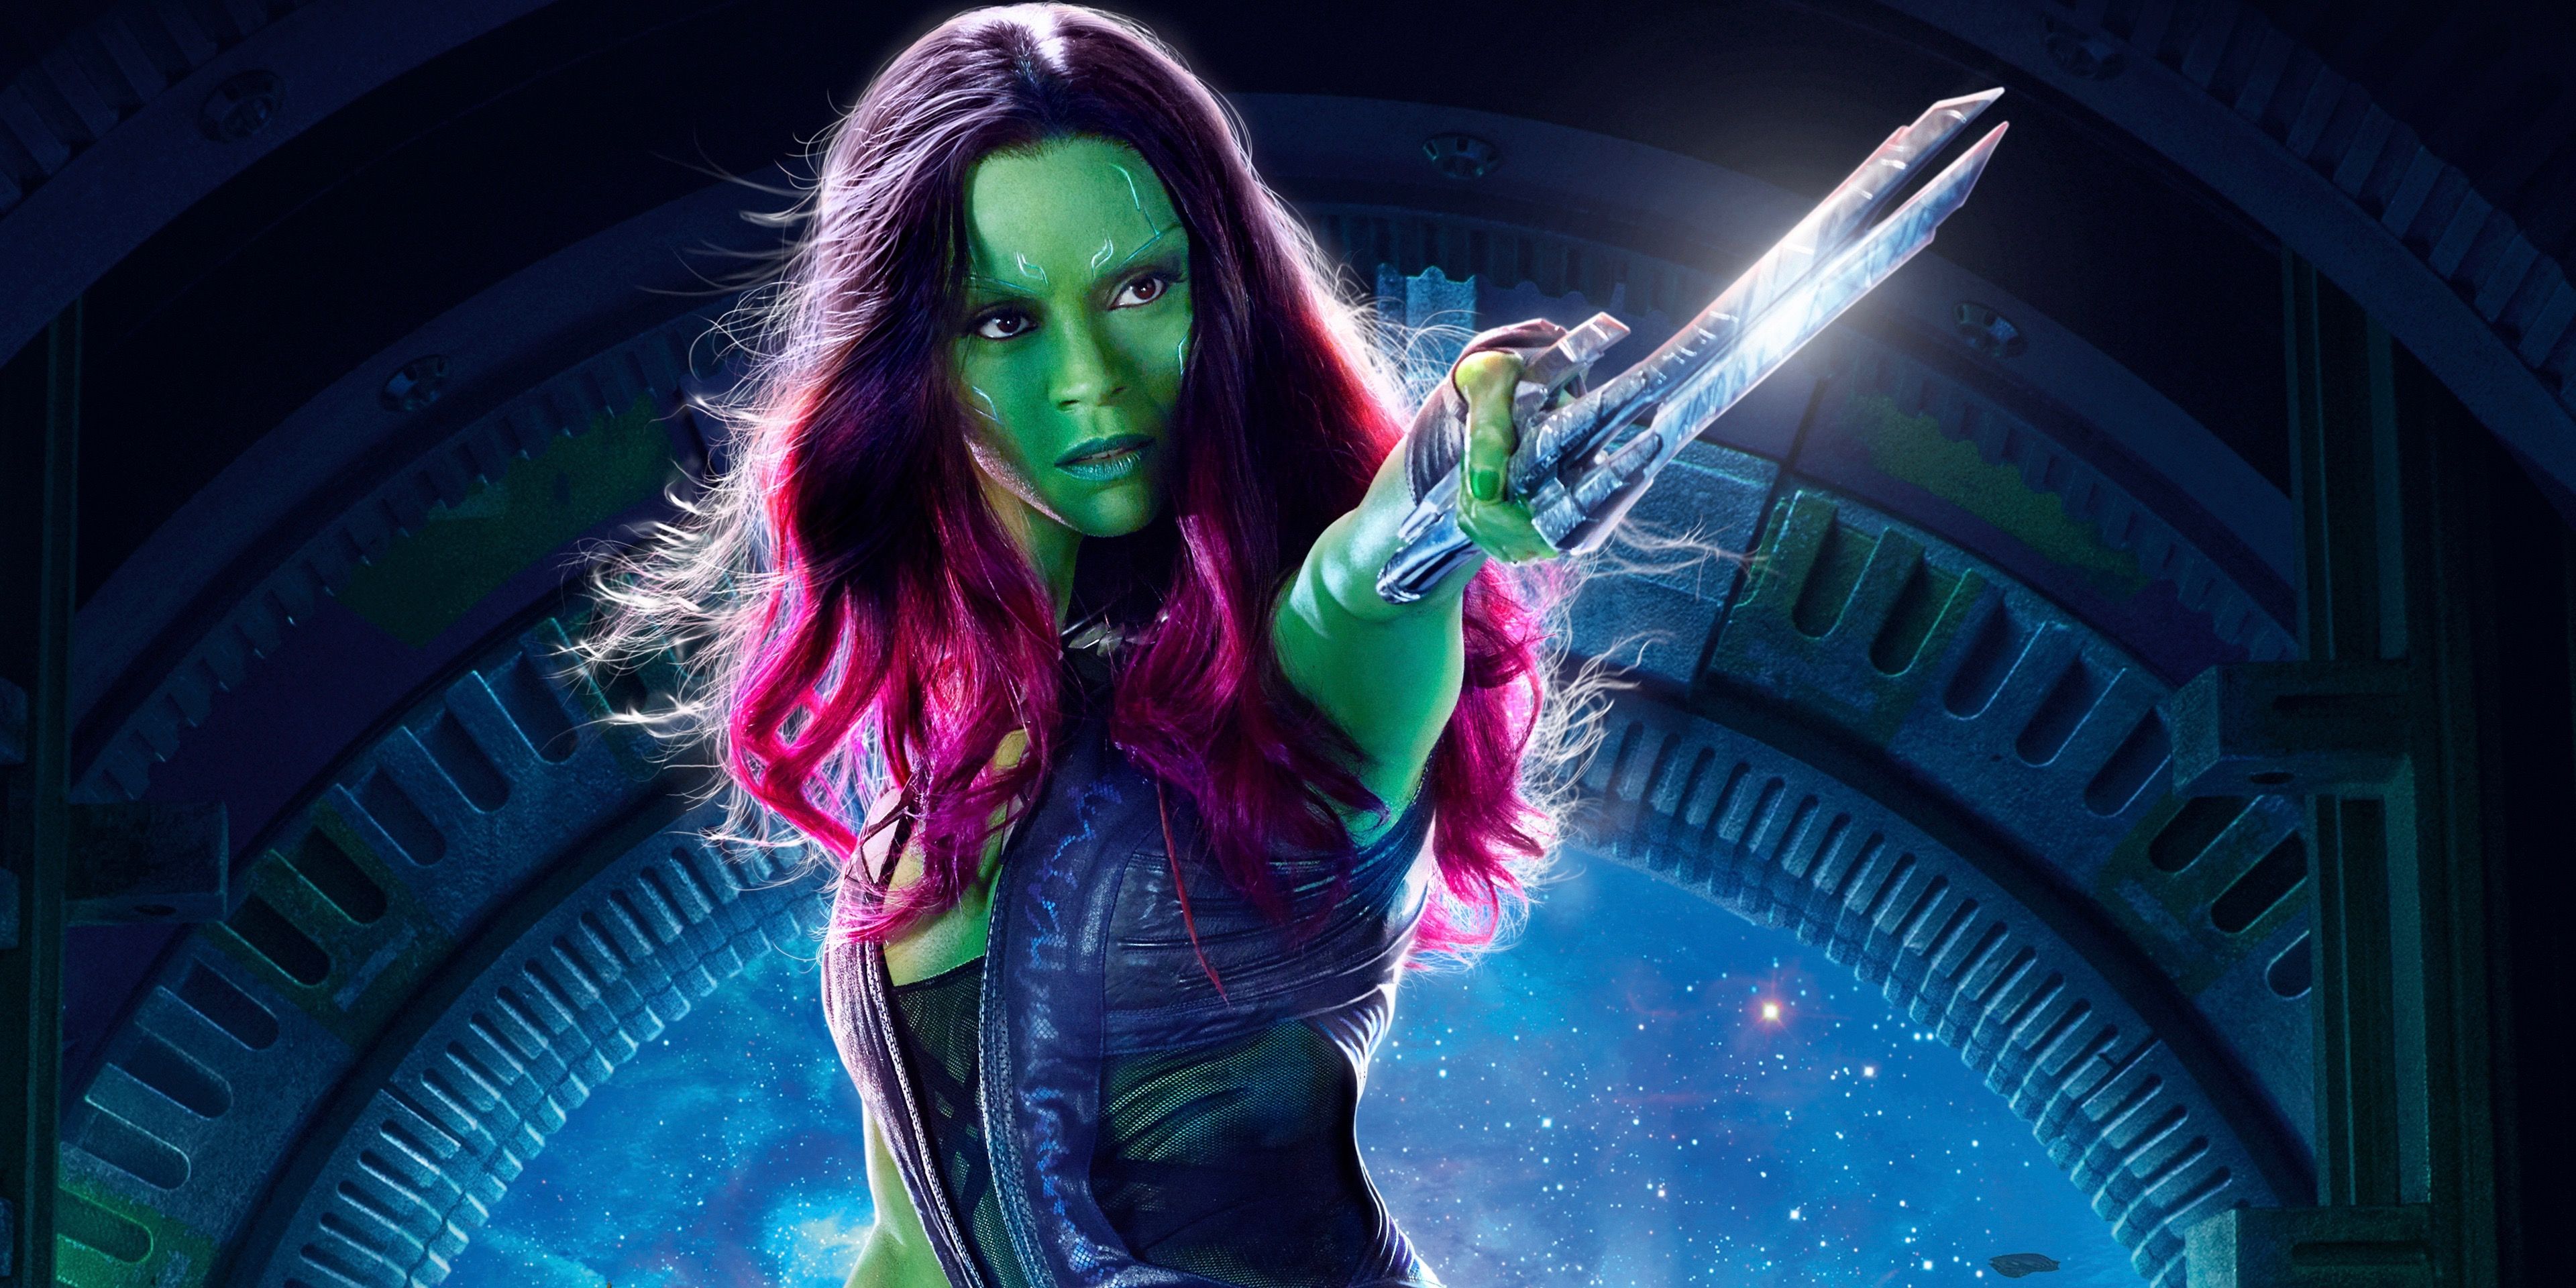 Gamora brandishes her blade in a poster for the MCU